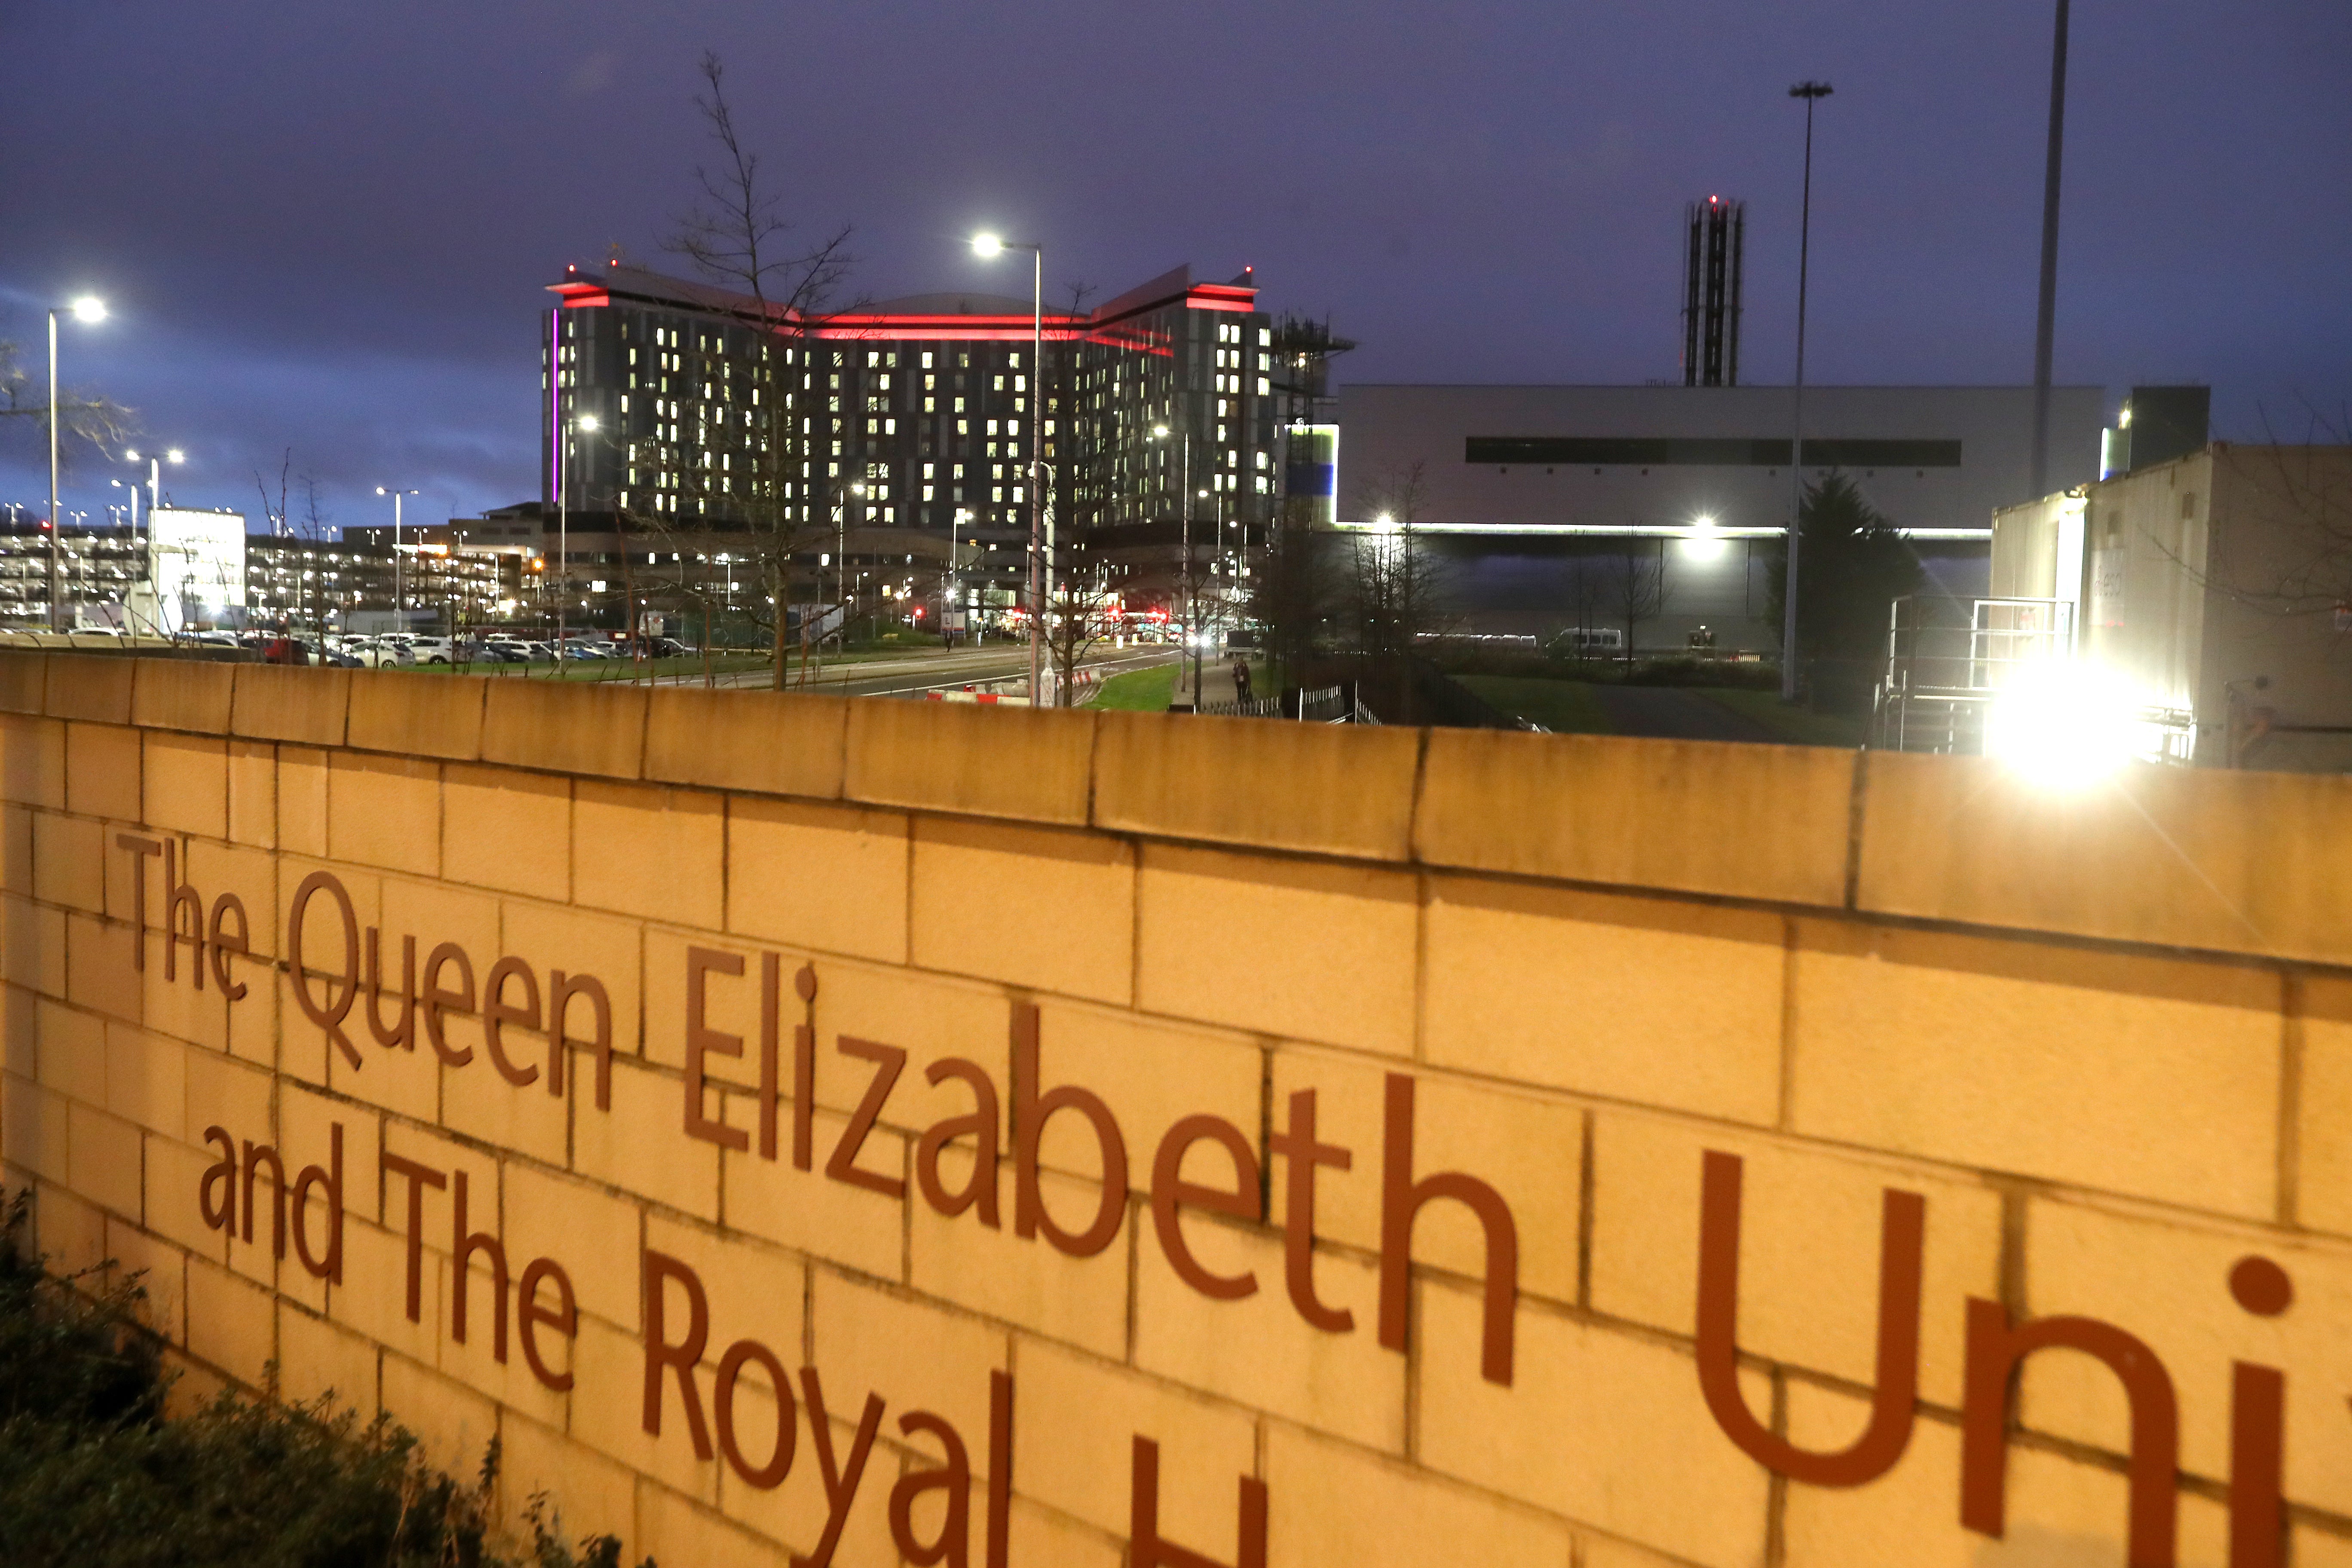 The Scottish Hospitals Inquiry is currently investigating the construction of the Queen Elizabeth University Hospital (QEUH) campus in Glasgow